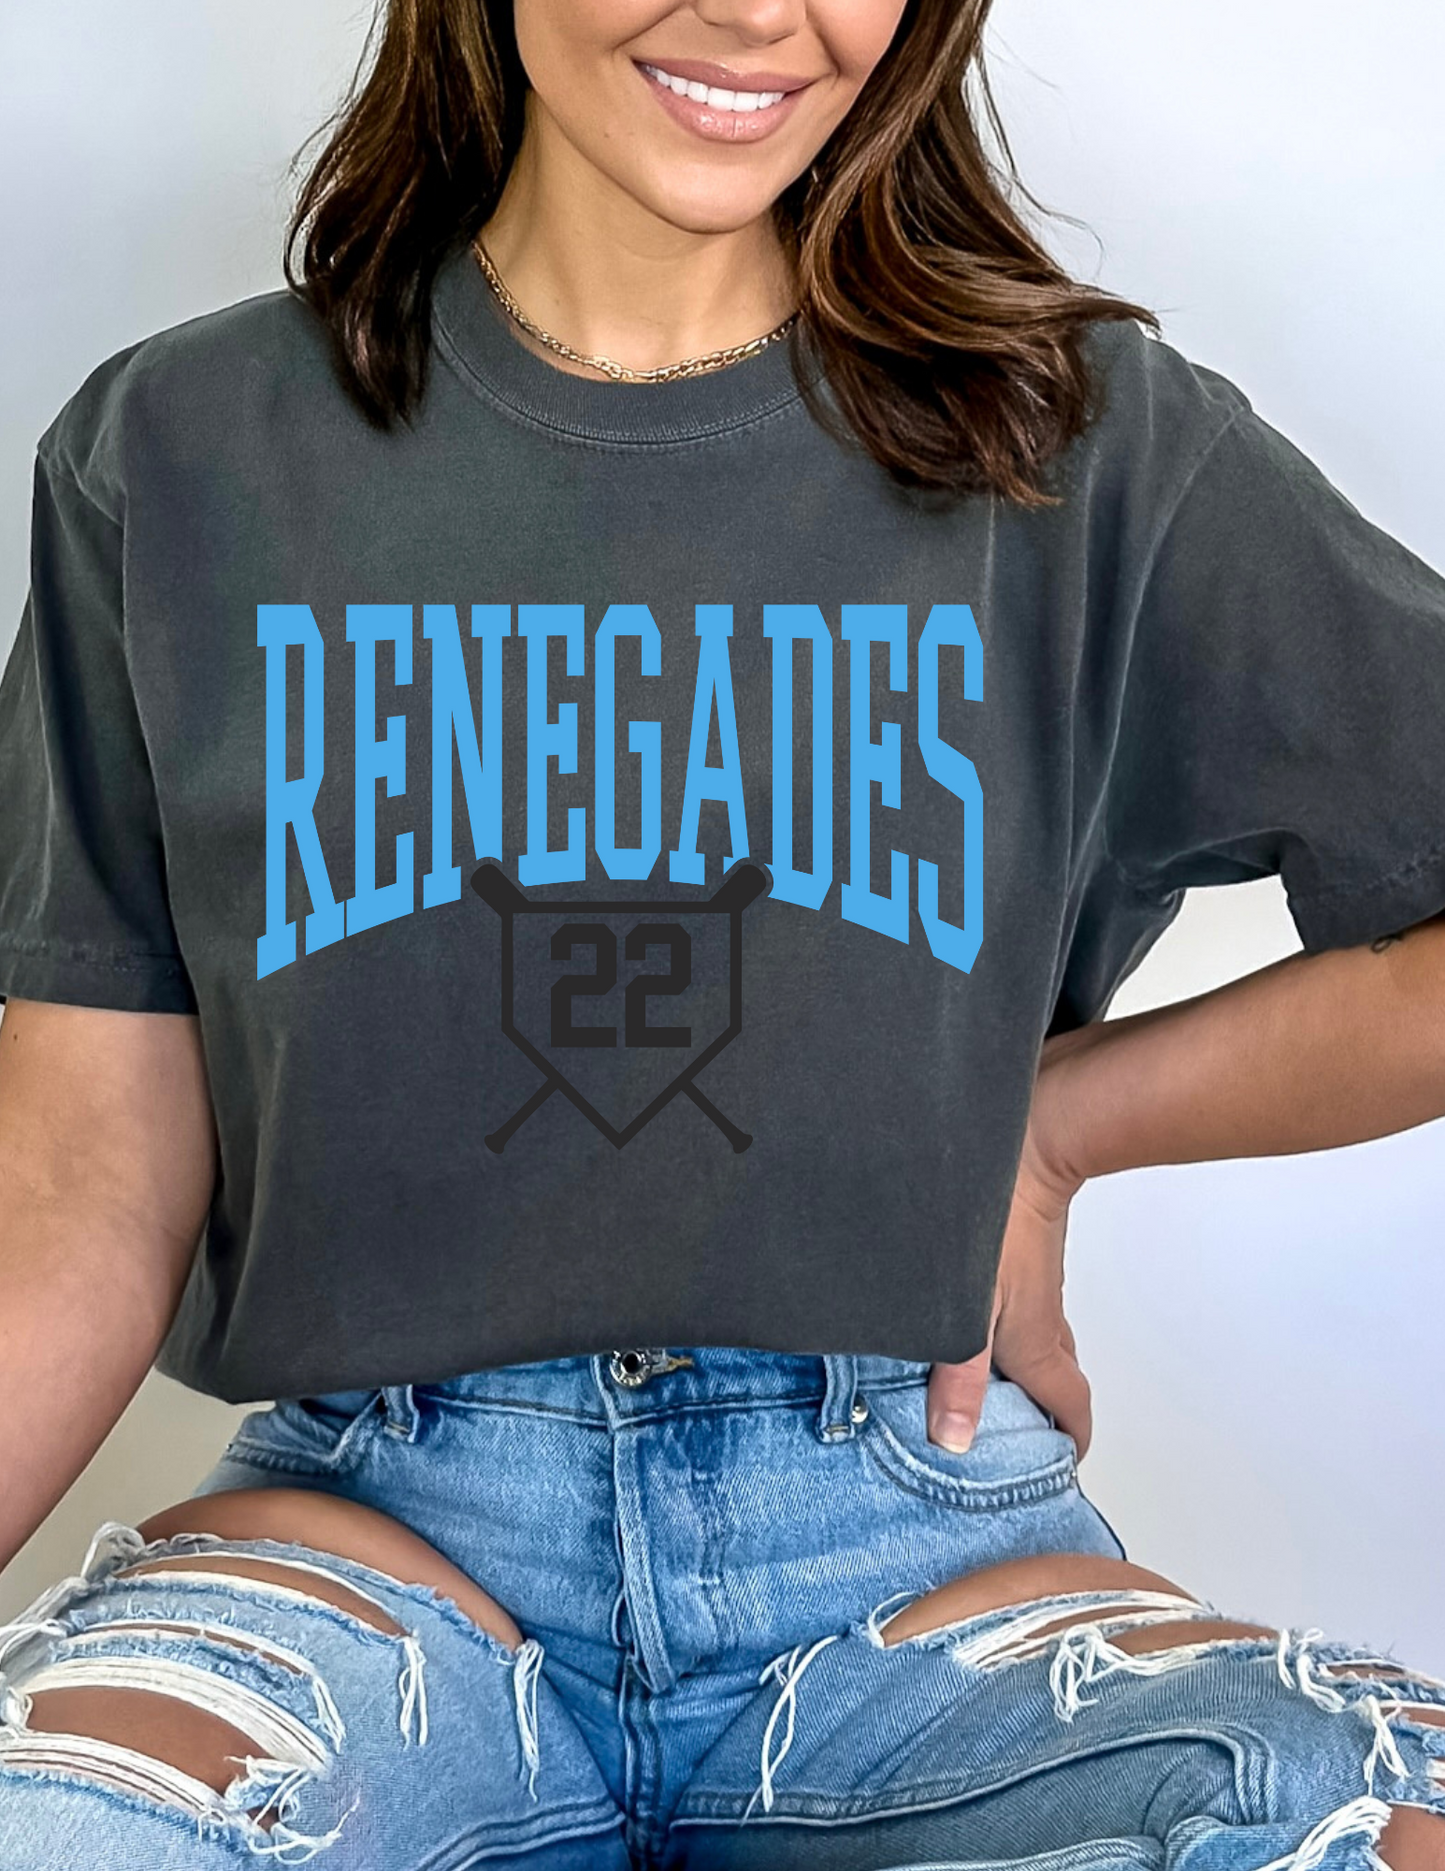 Renegades Home Plate (Comfort Colors)